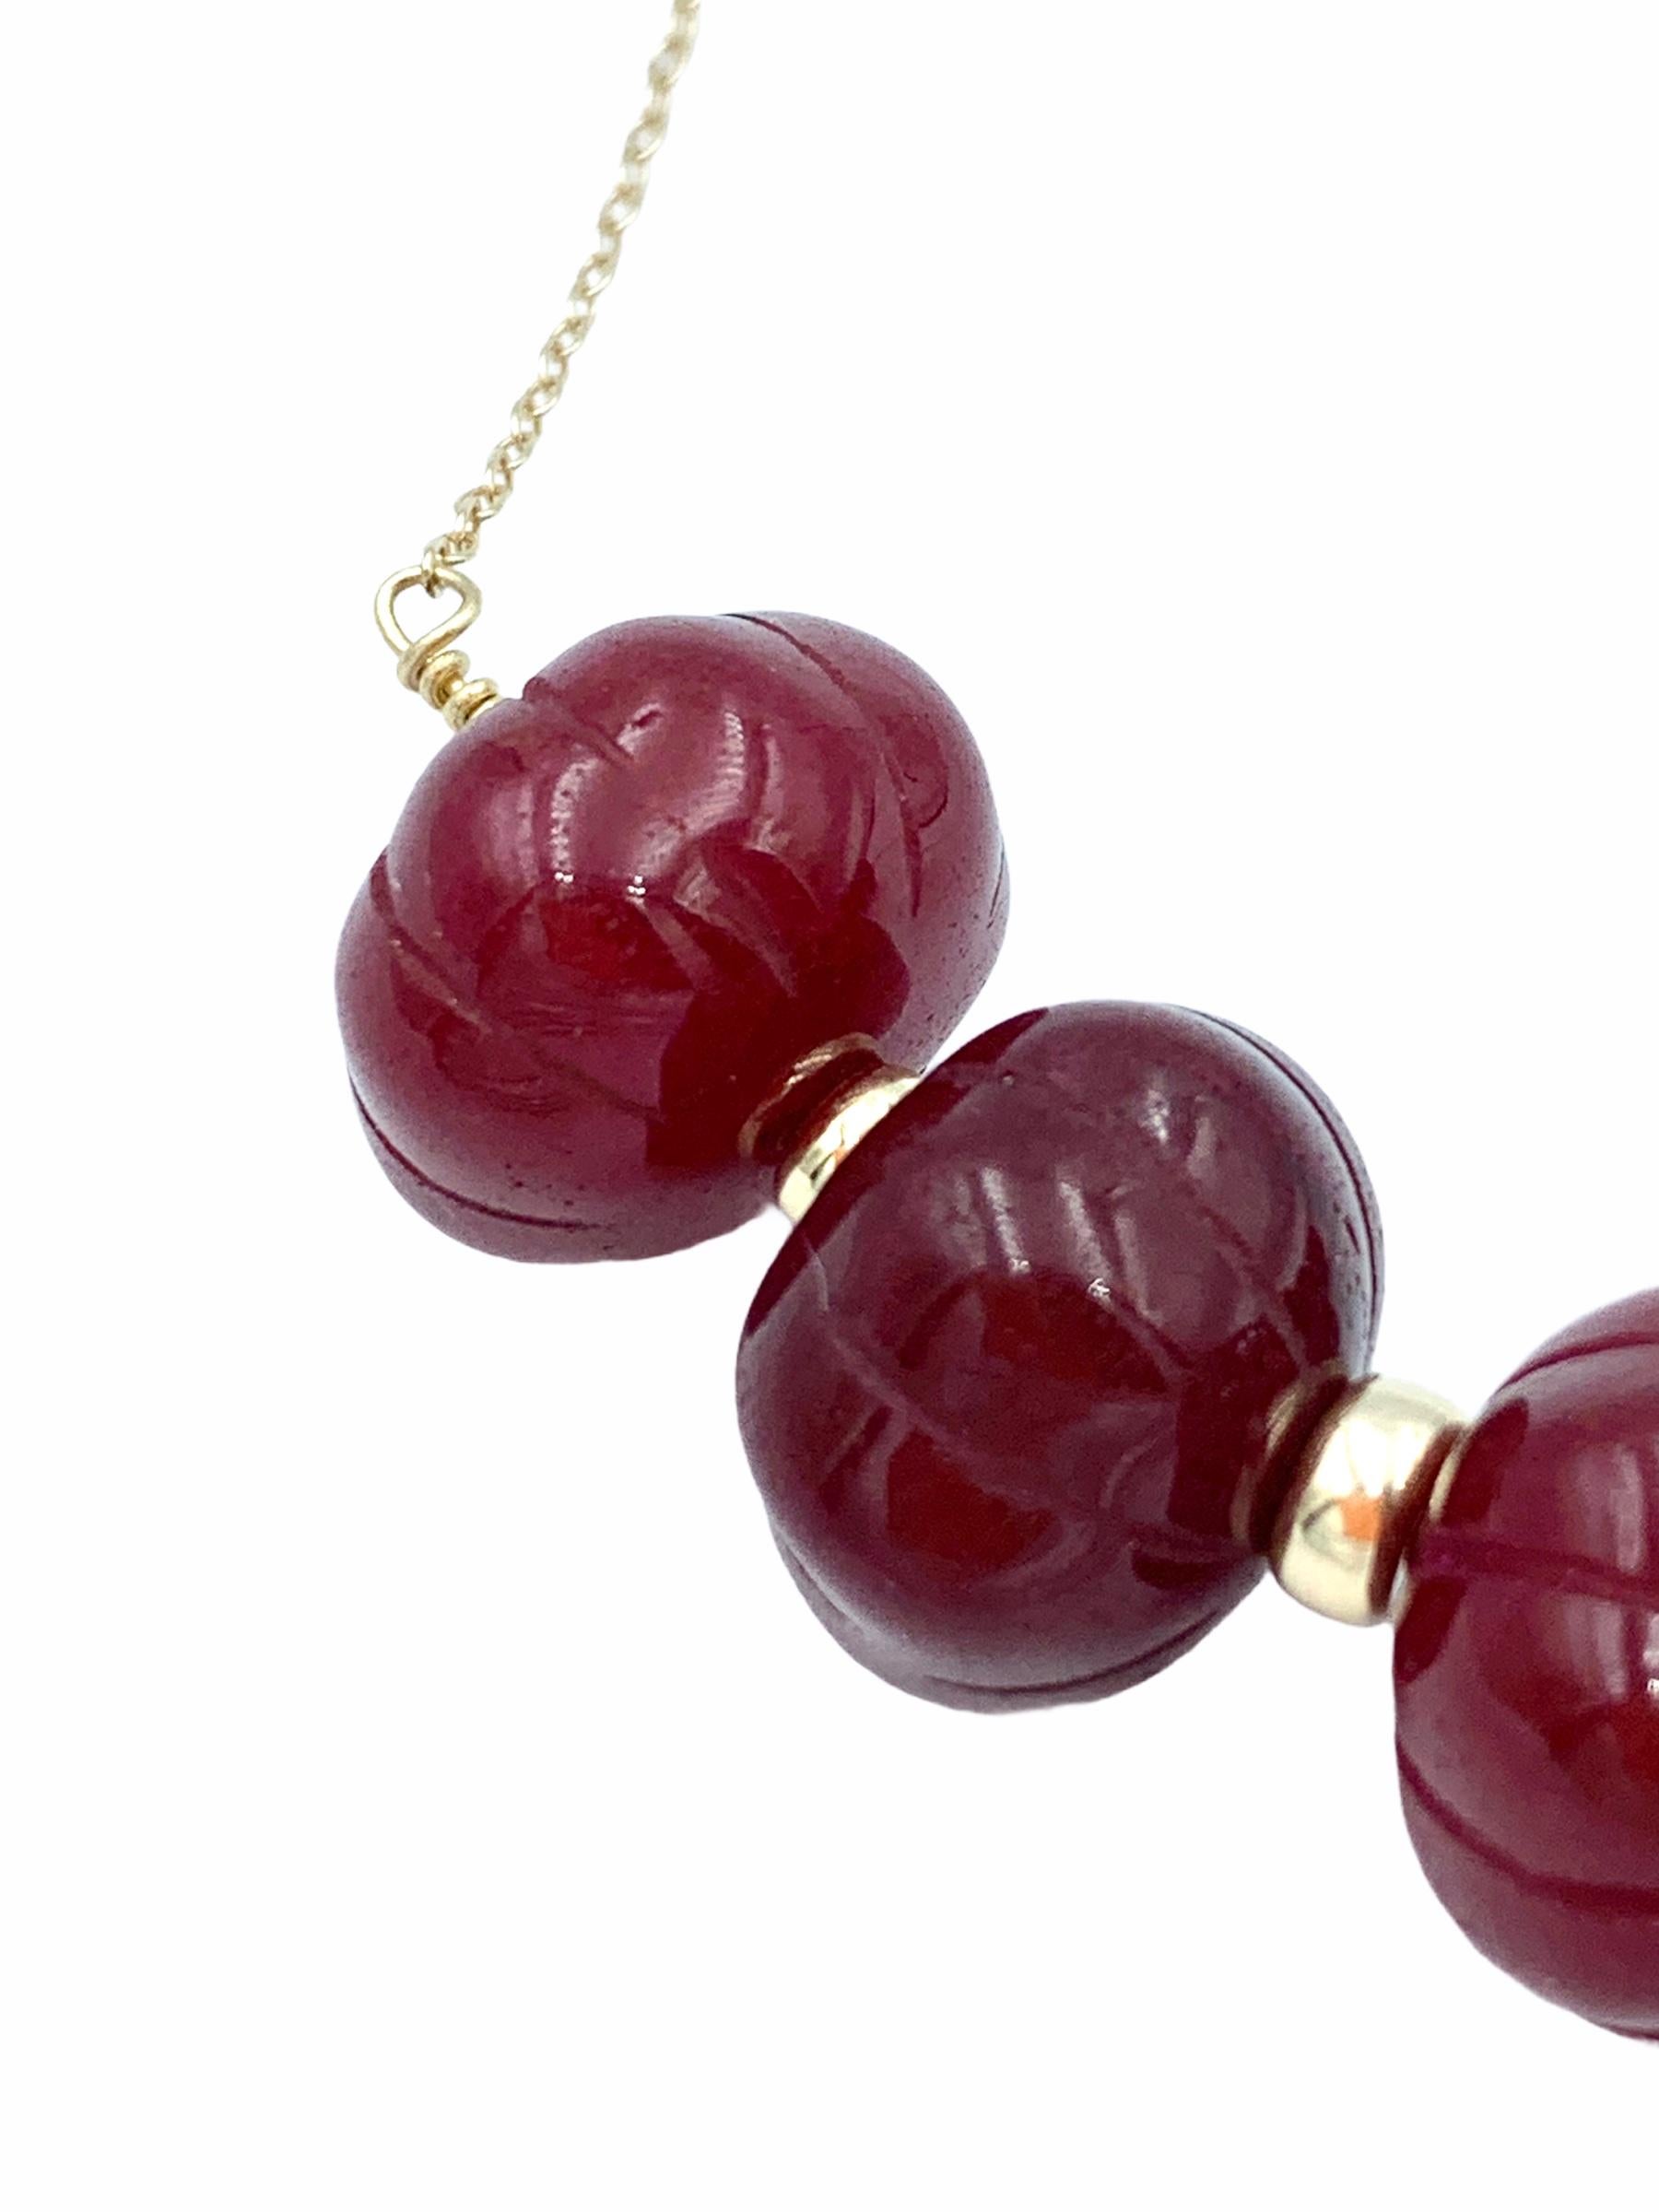 Hand made using 14 carat Yellow Gold, the suspended Carved Ruby beads are threaded together with a solid gold wire and graduated onto a delicate 1.3 mm cable chain. The intense red hues are carried throughout the misshapen beads with a  centre bead